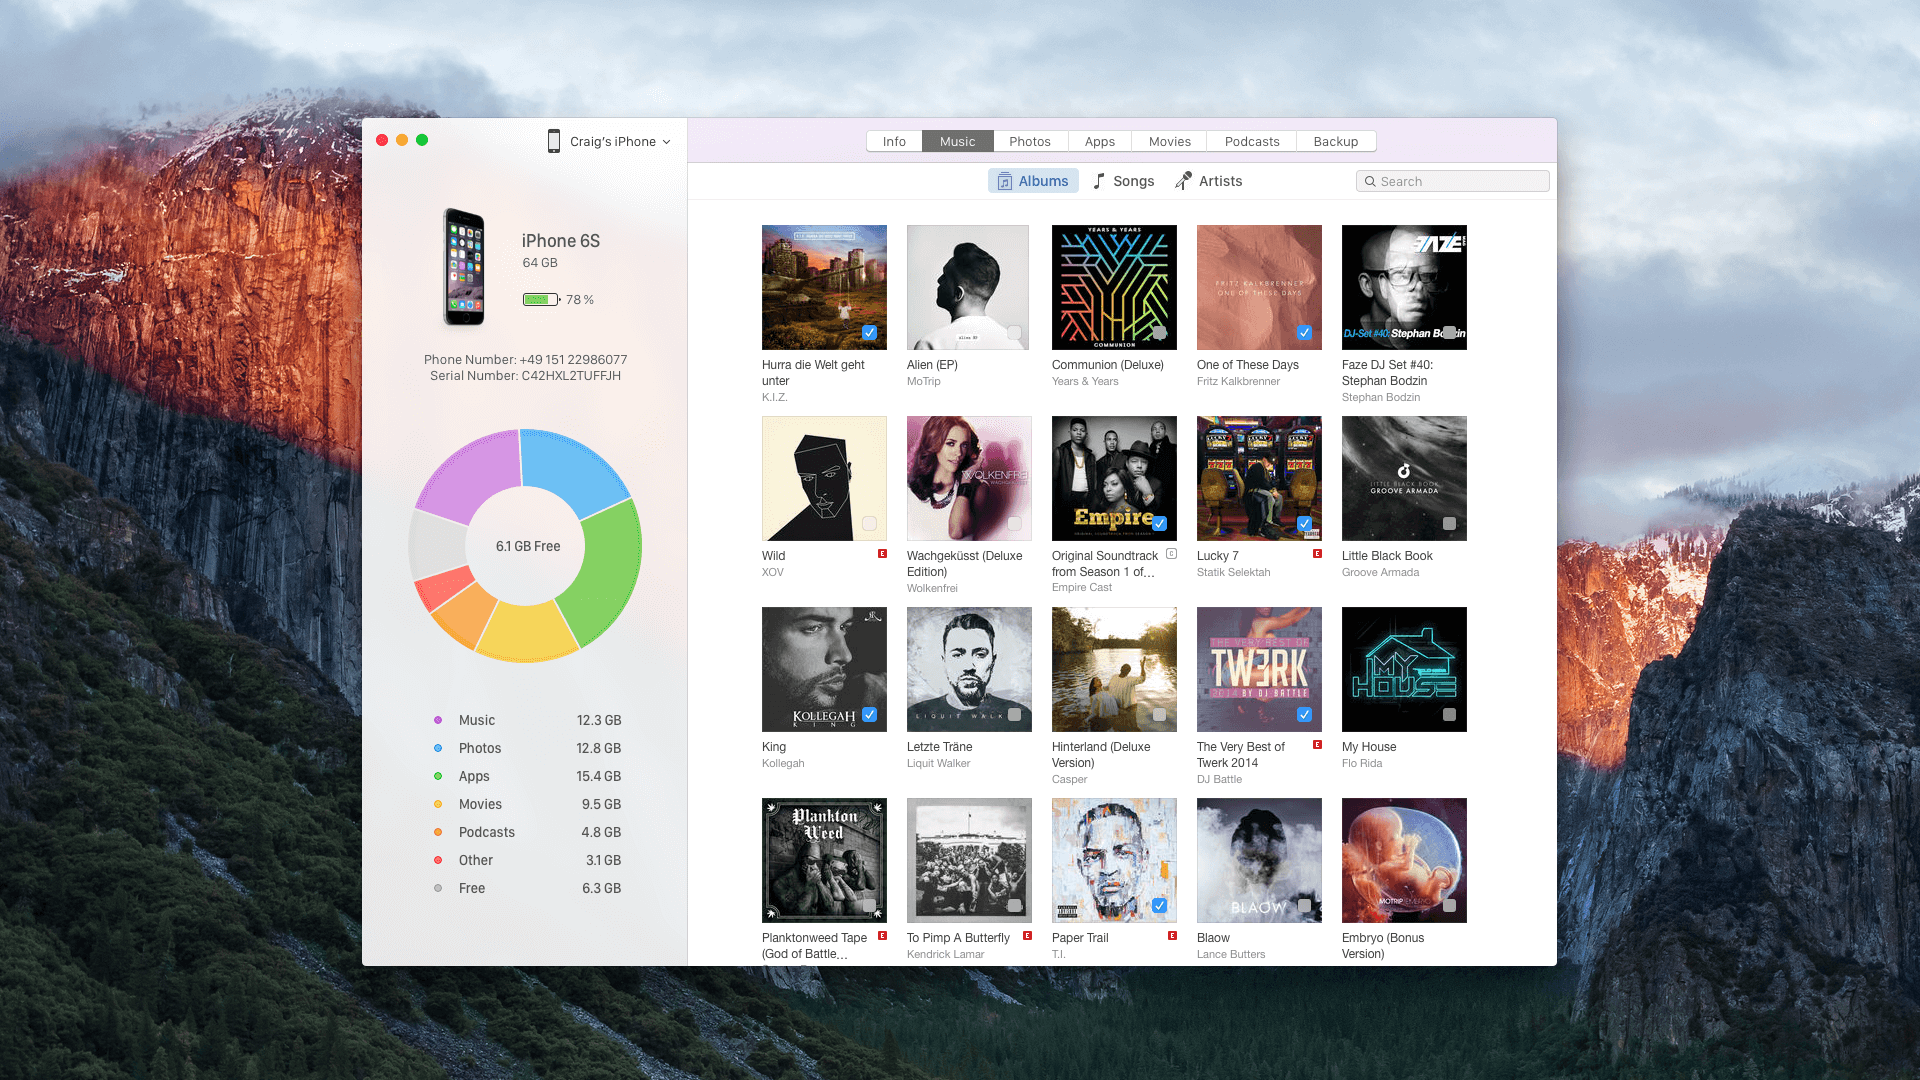 Would iTunes look better like this?